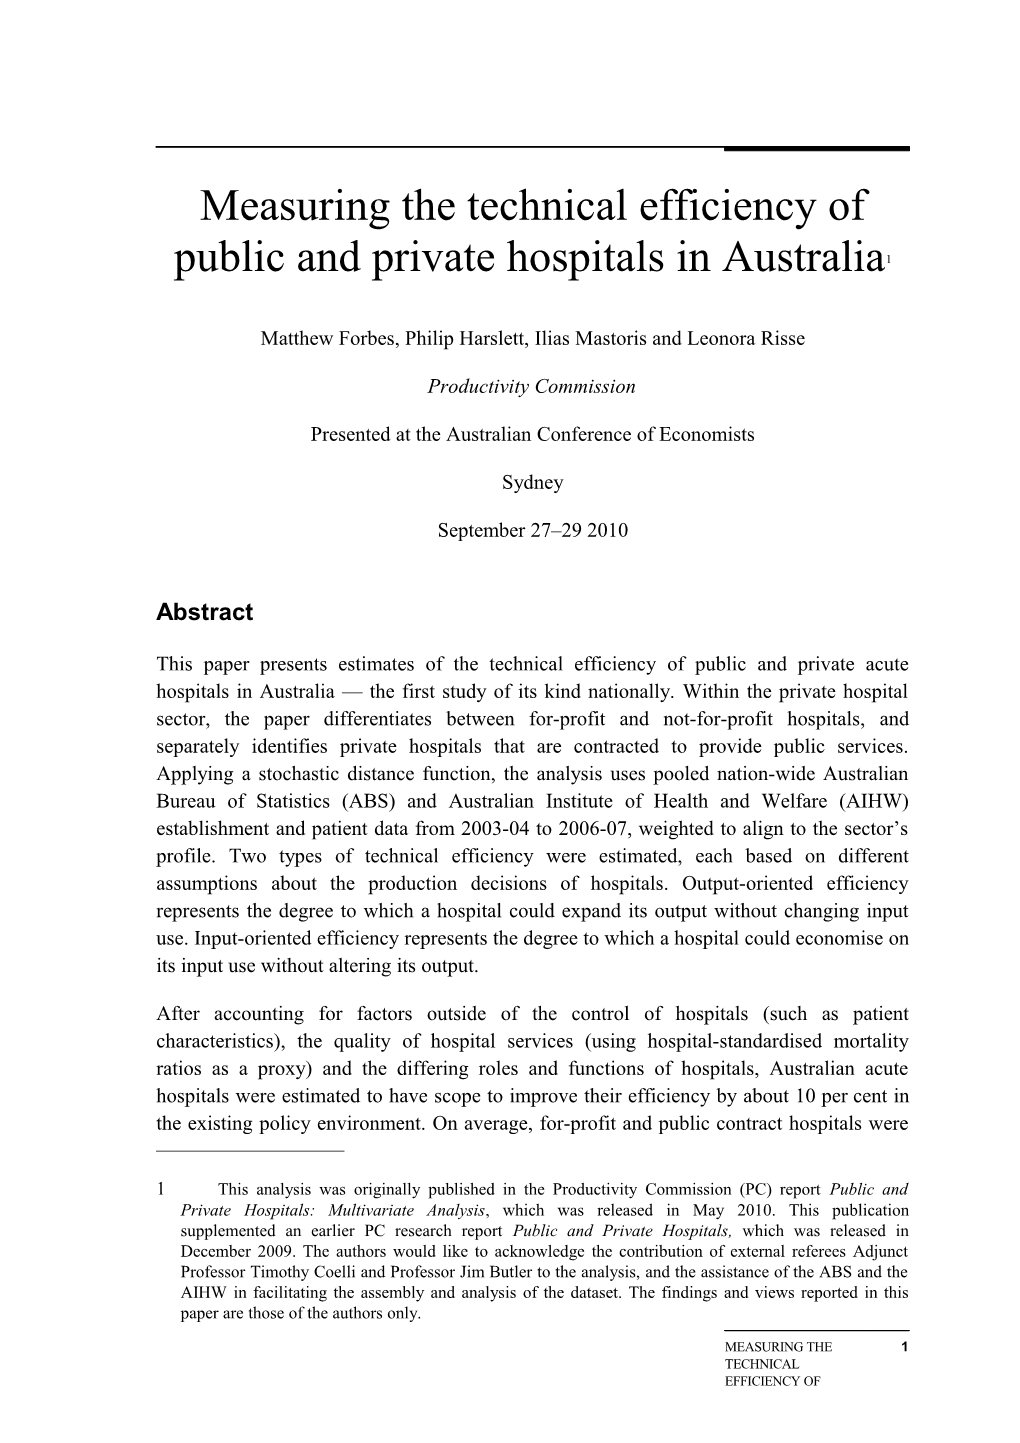 Measuring the Technical Efficiency of Public and Private Hospitals in Australia - Conference